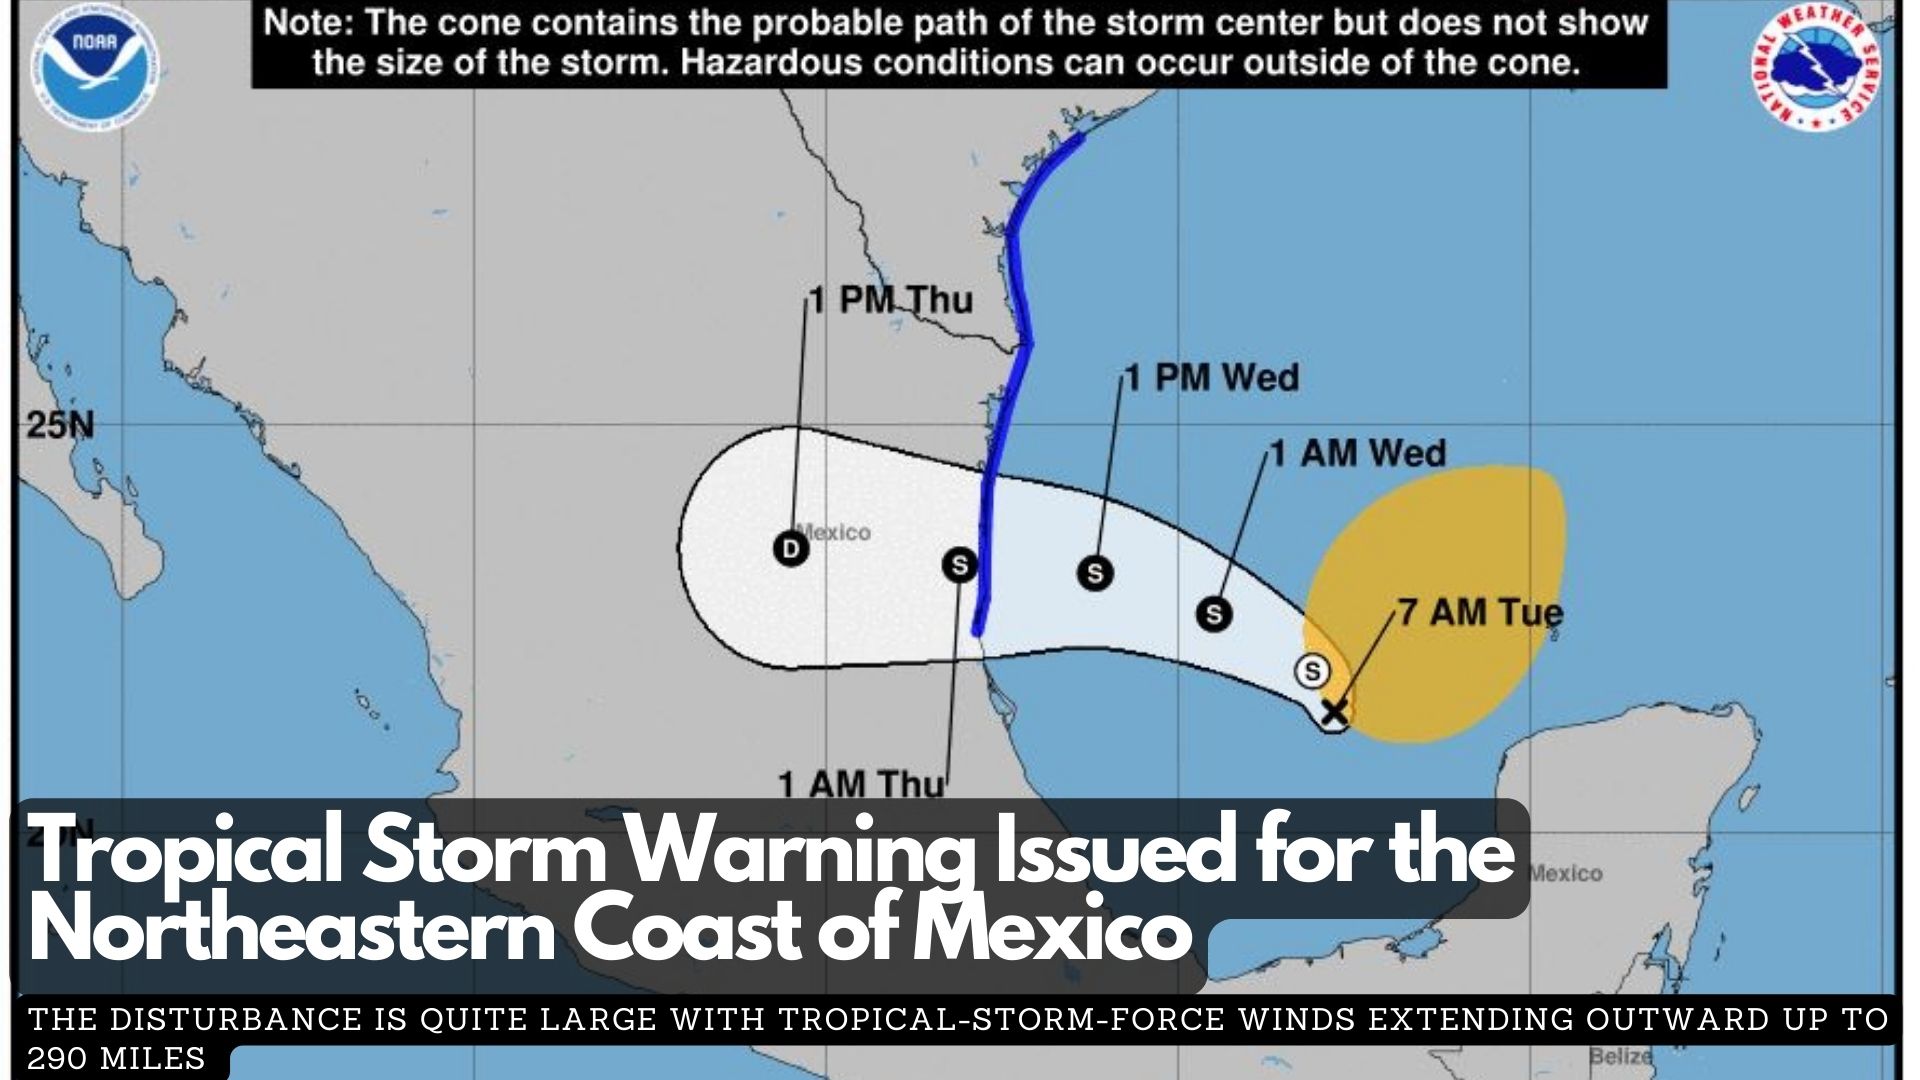 Tropical Storm Warning Issued for the Northeastern Coast of Mexico